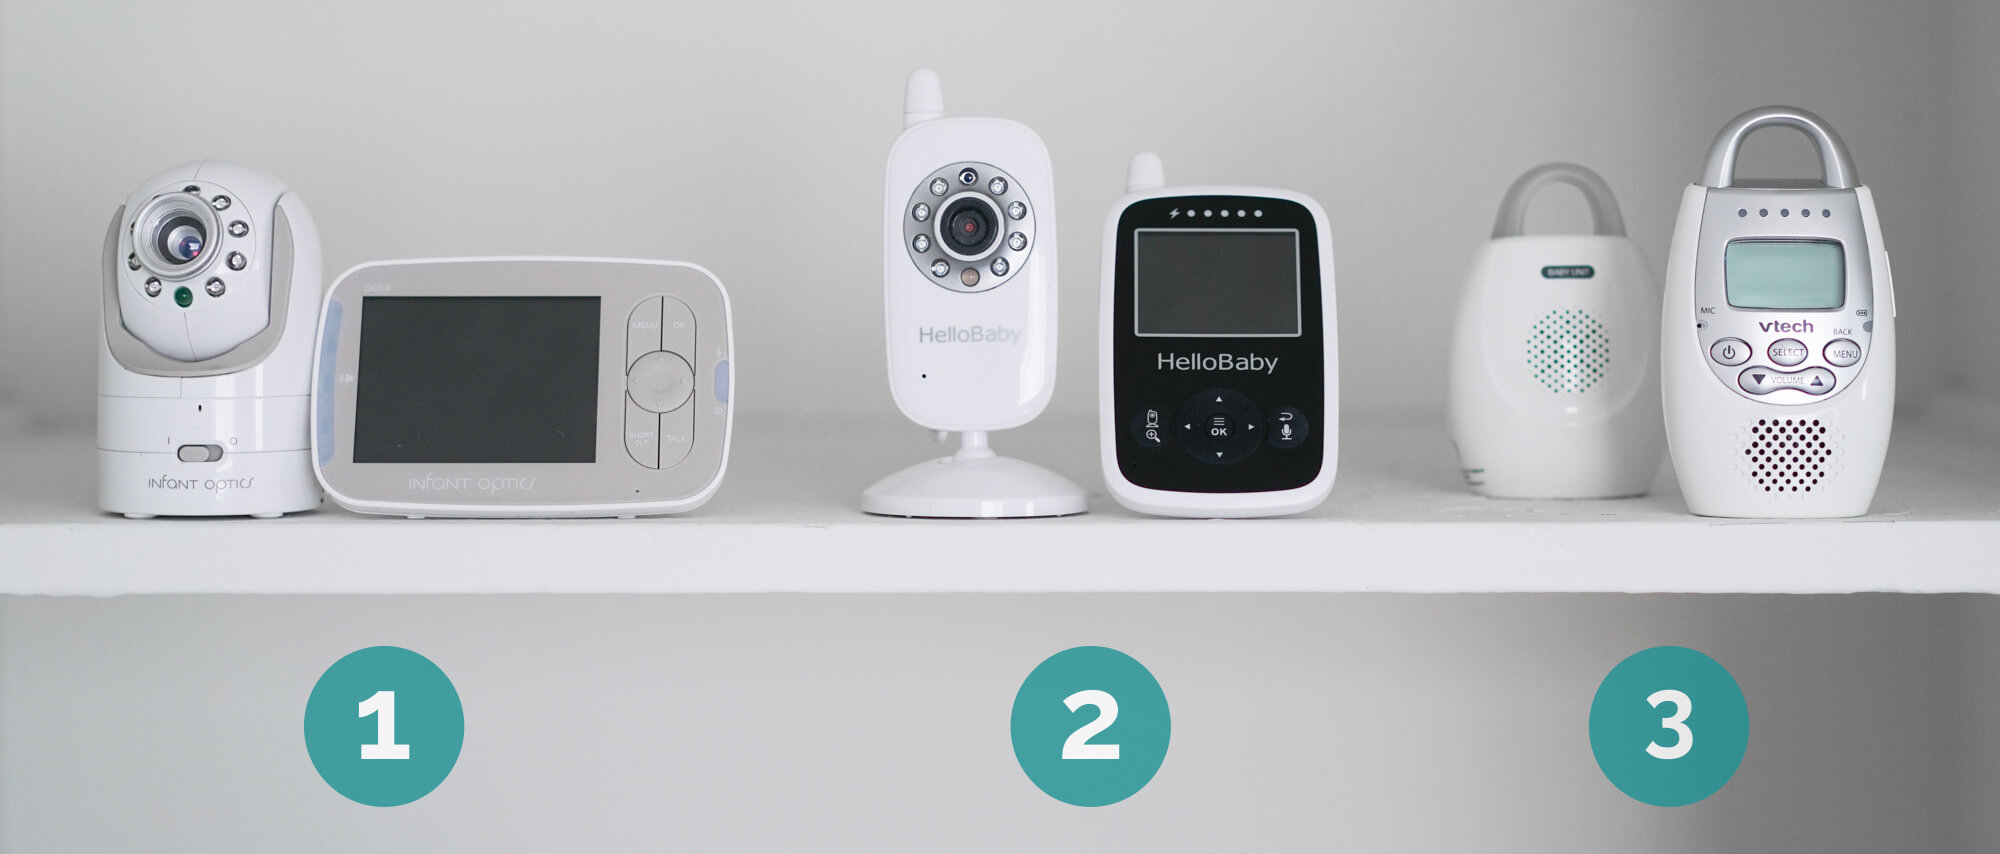 Can HelloBaby Baby Monitors Be Hacked? (We Checked)